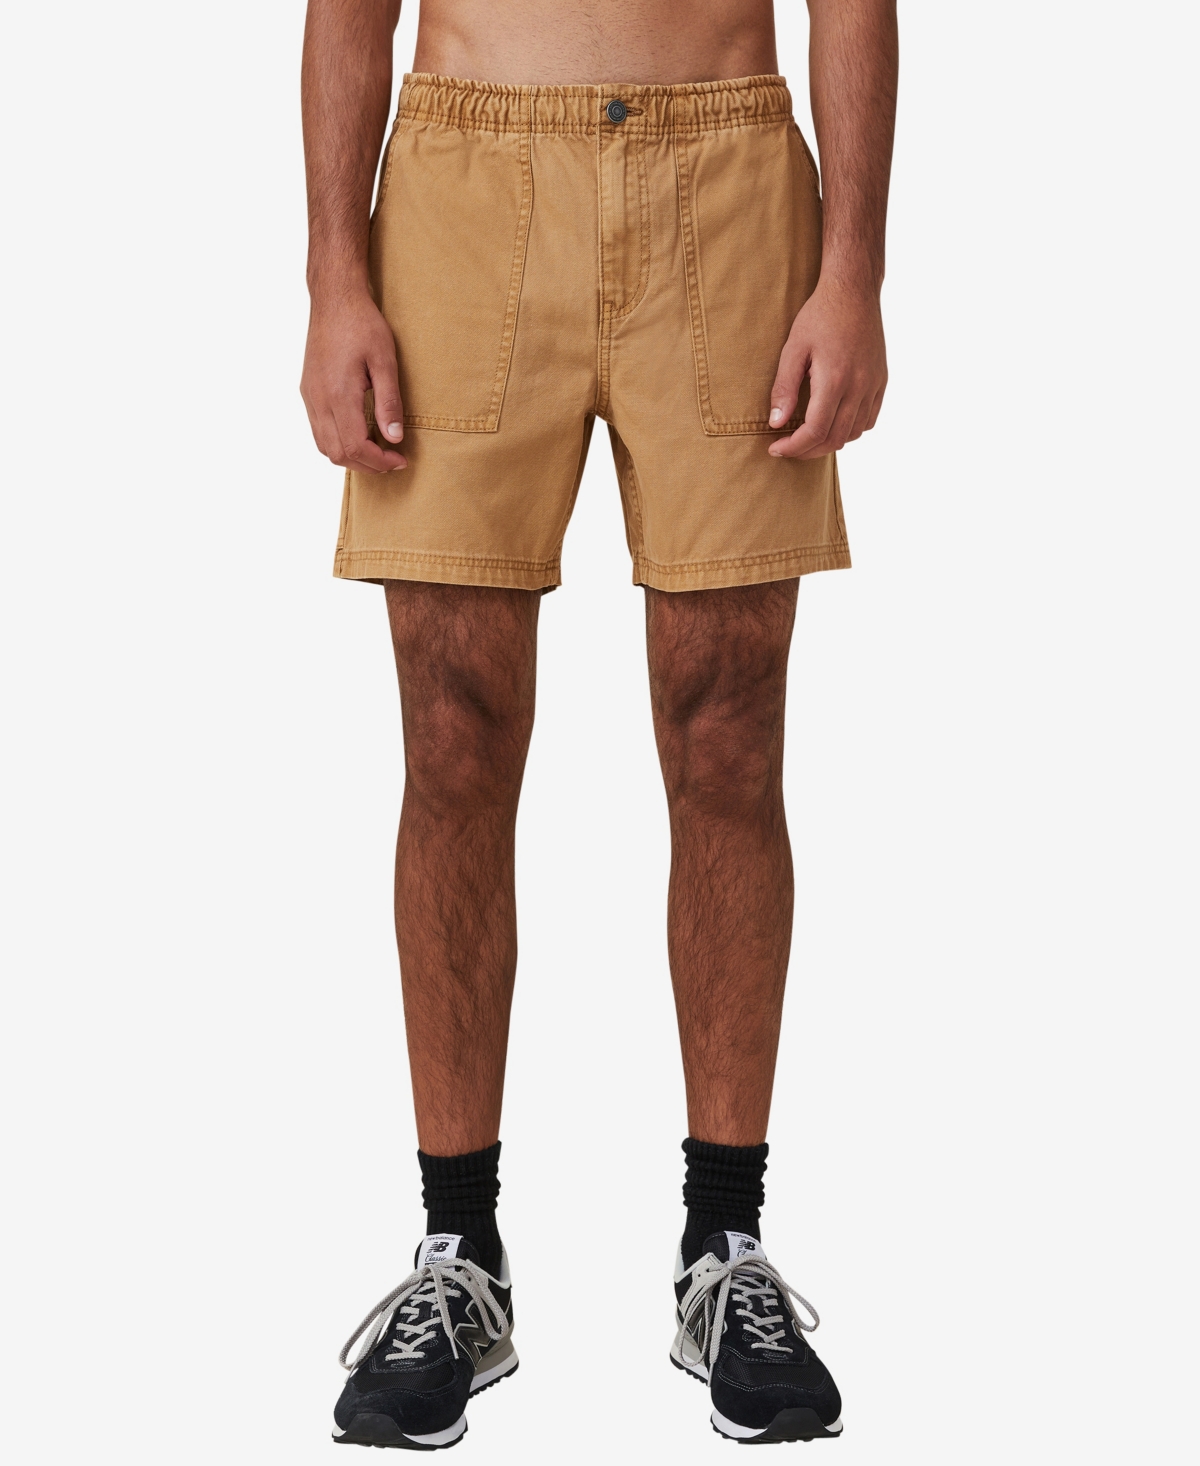 Cotton On Men's Worker Chino Shorts In Washed Dijon Utility